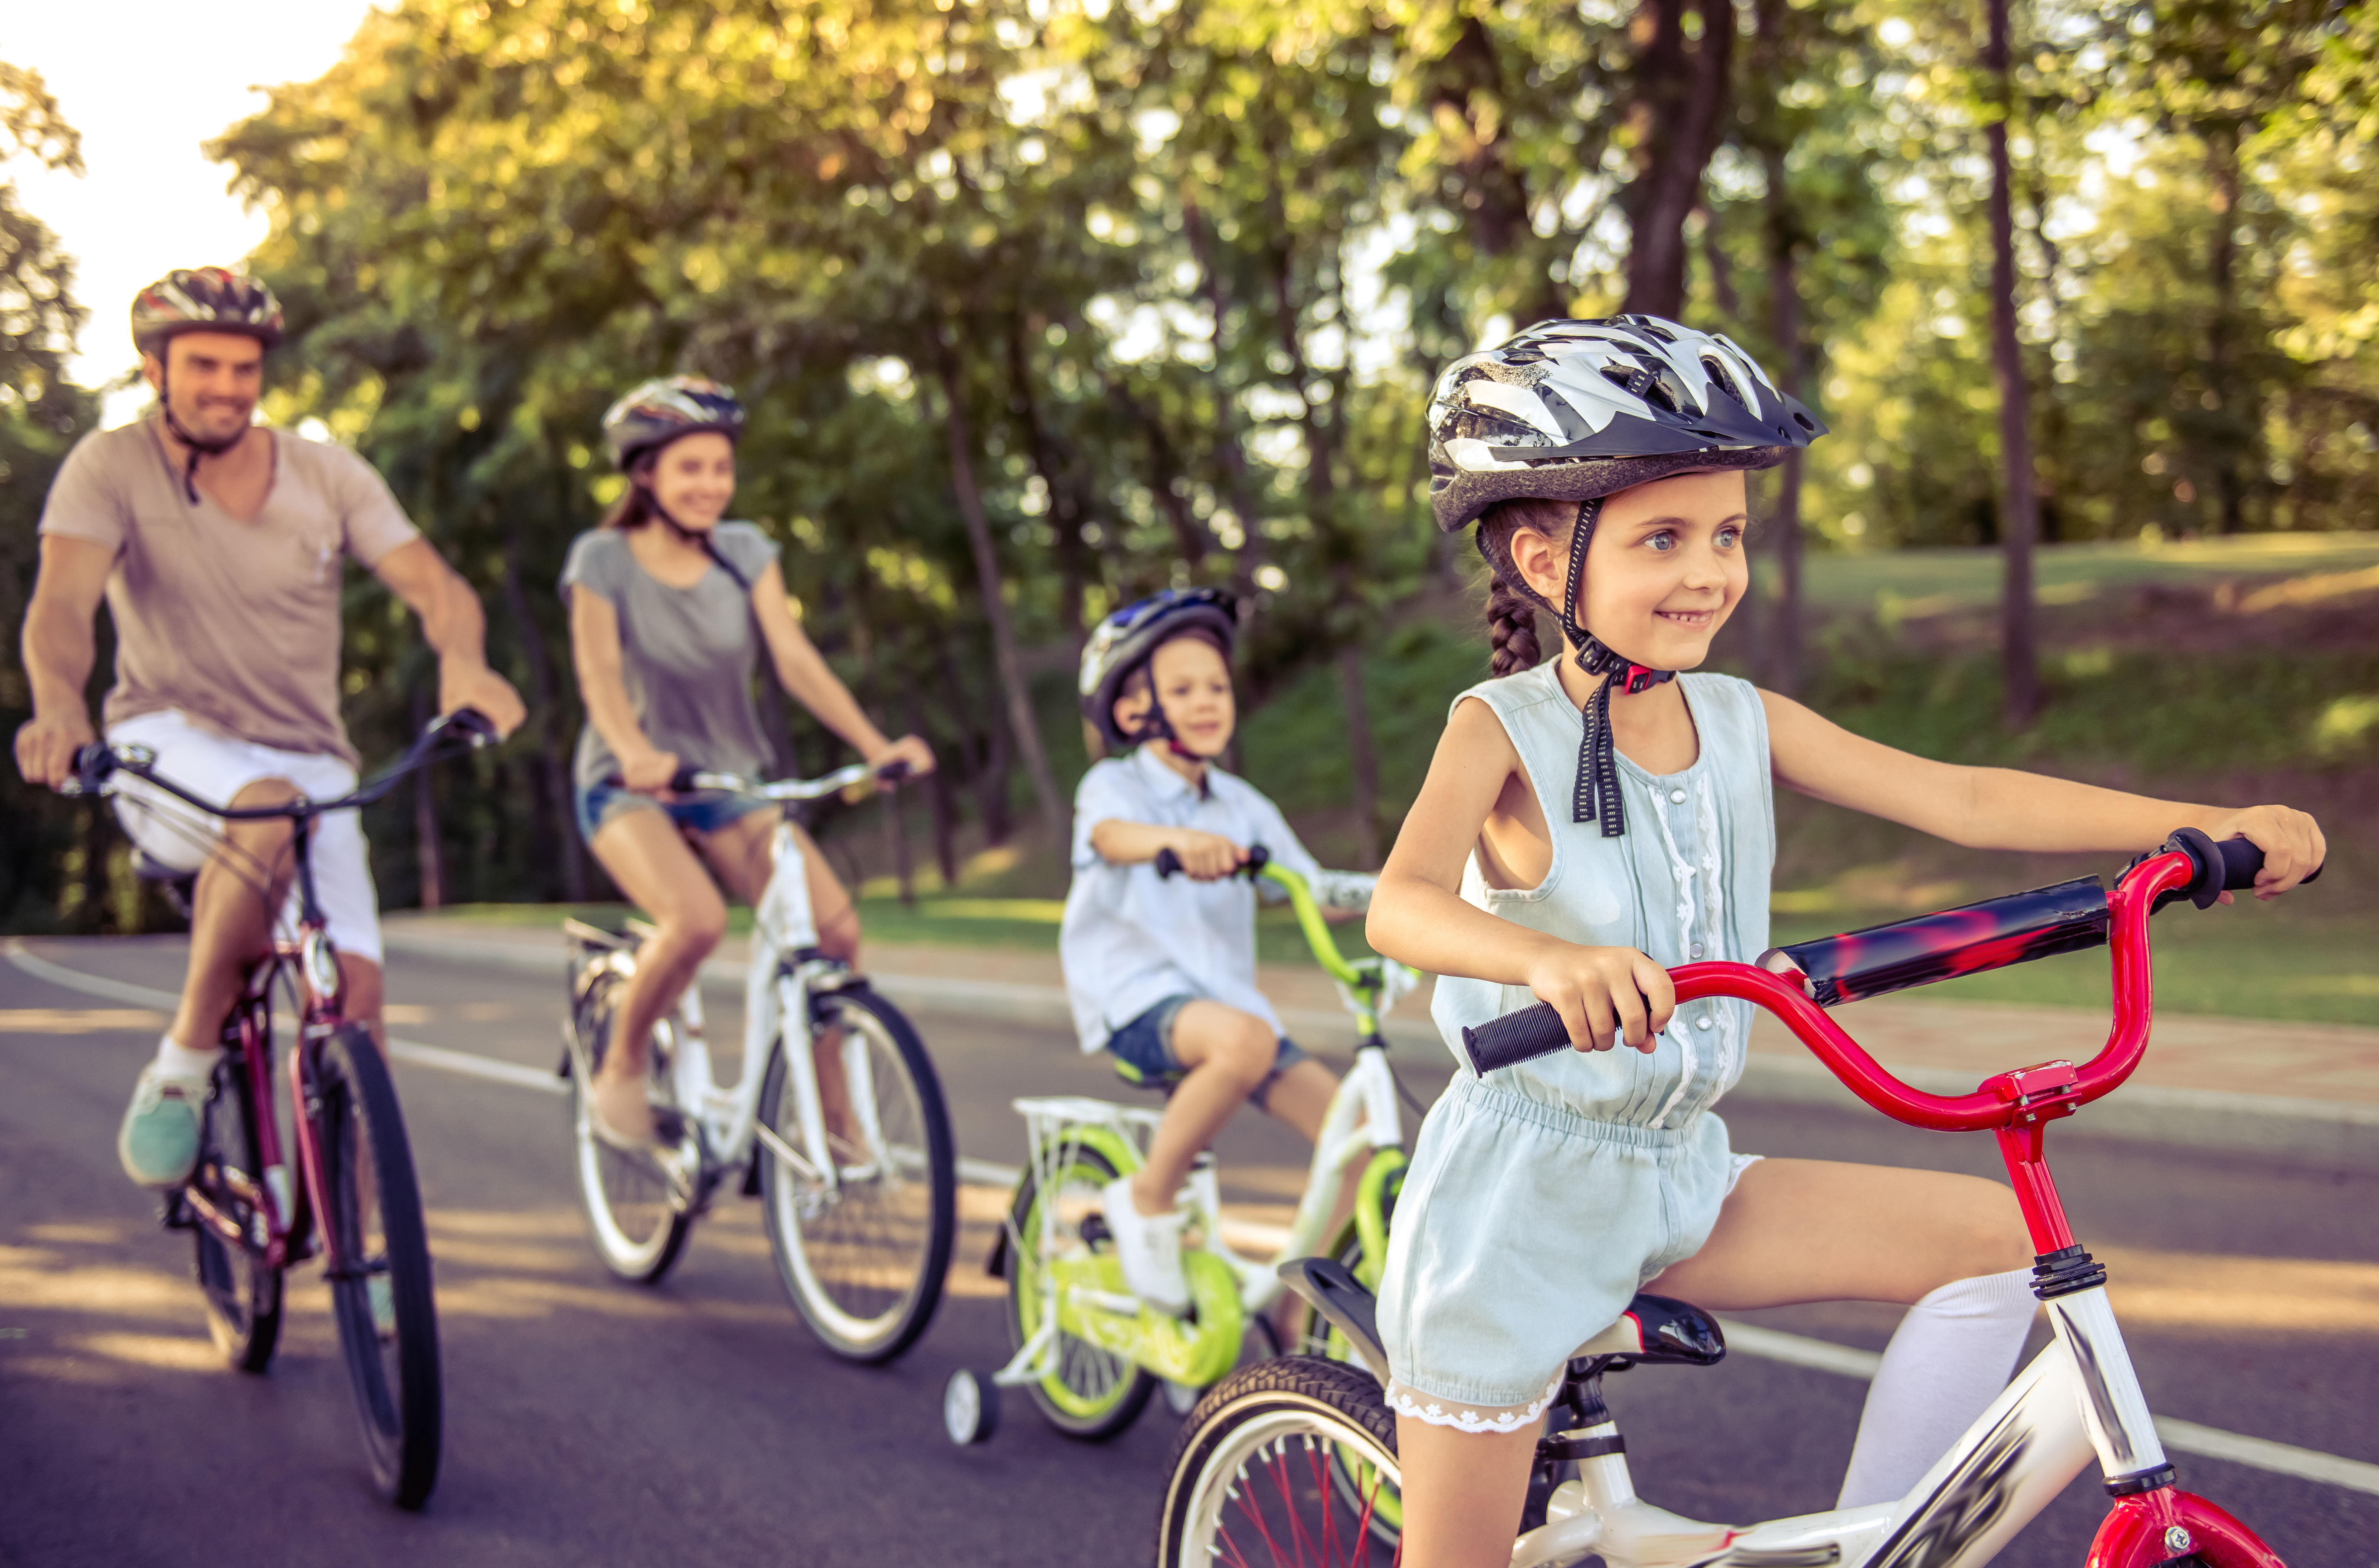 Happy family is riding bikes outdoors and smiling. Little girl in the foreground